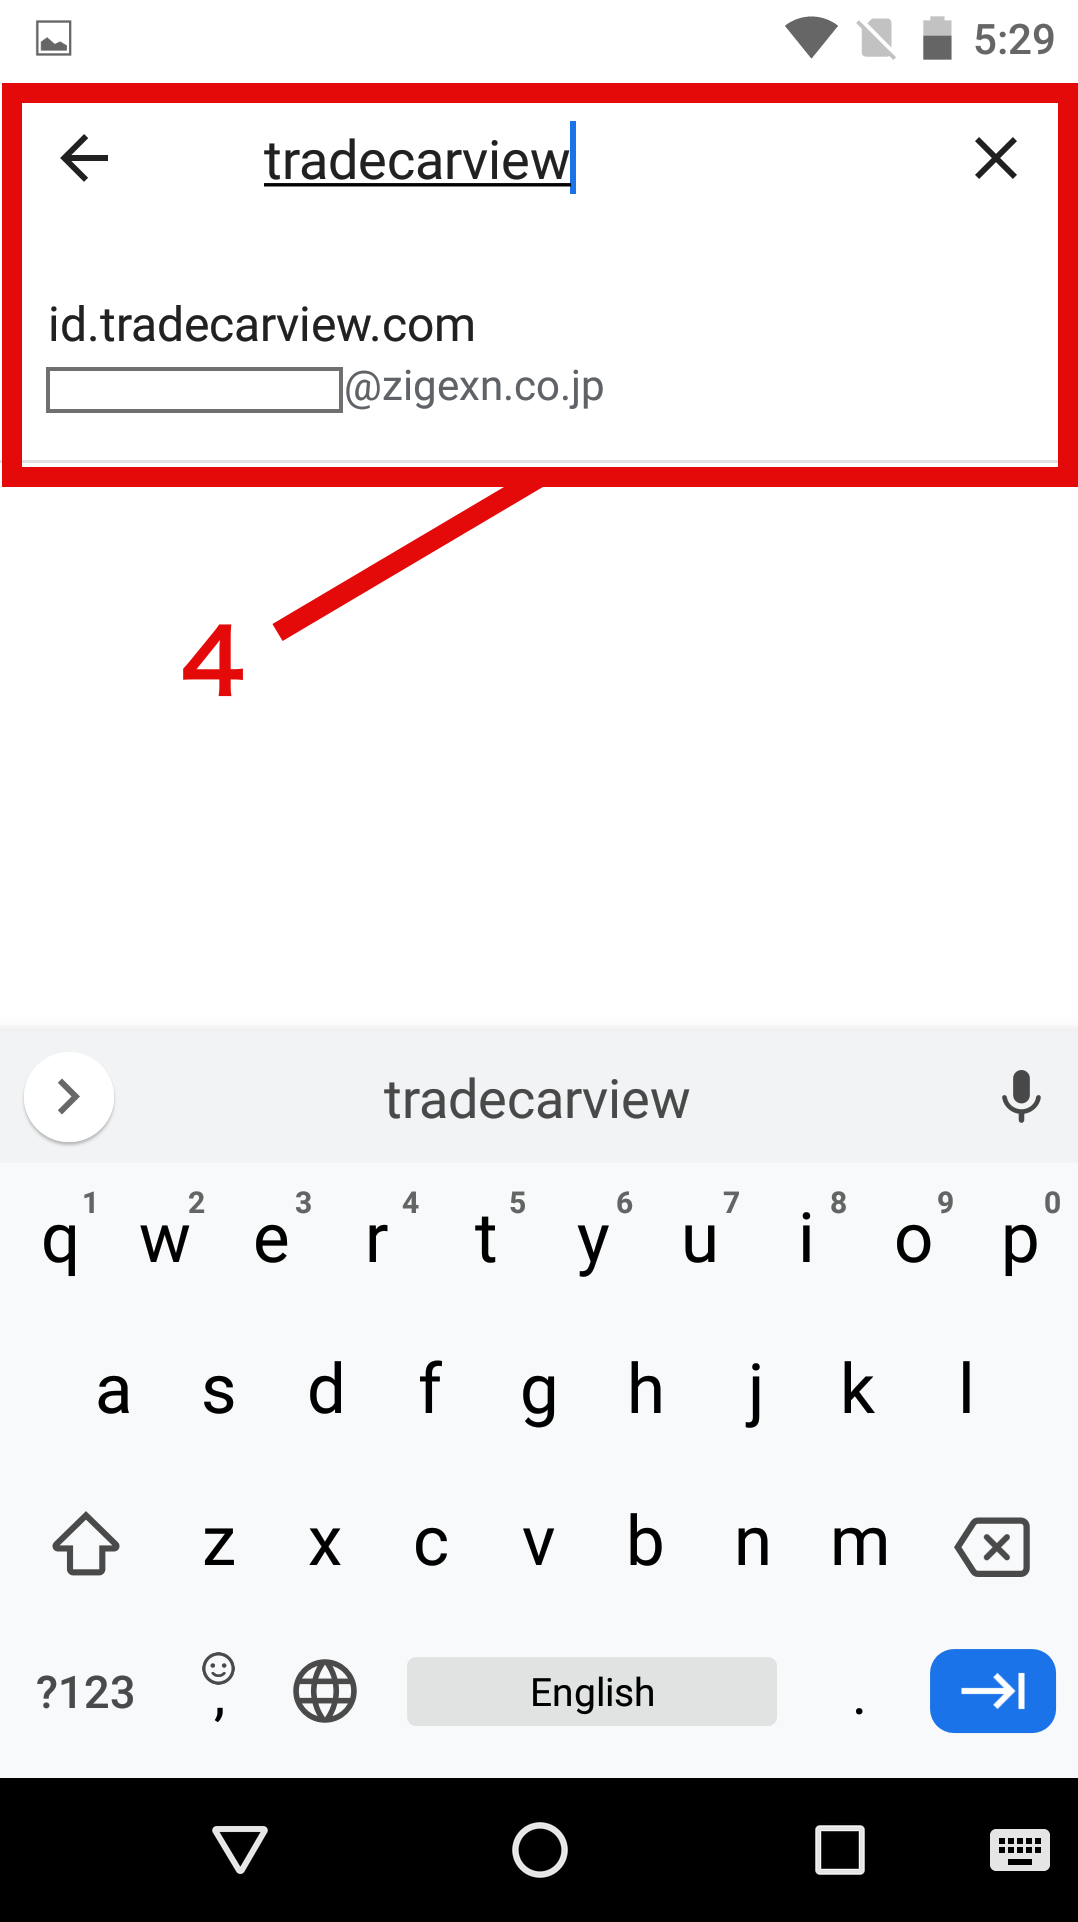 4. Enter tradecarview in the search window to display